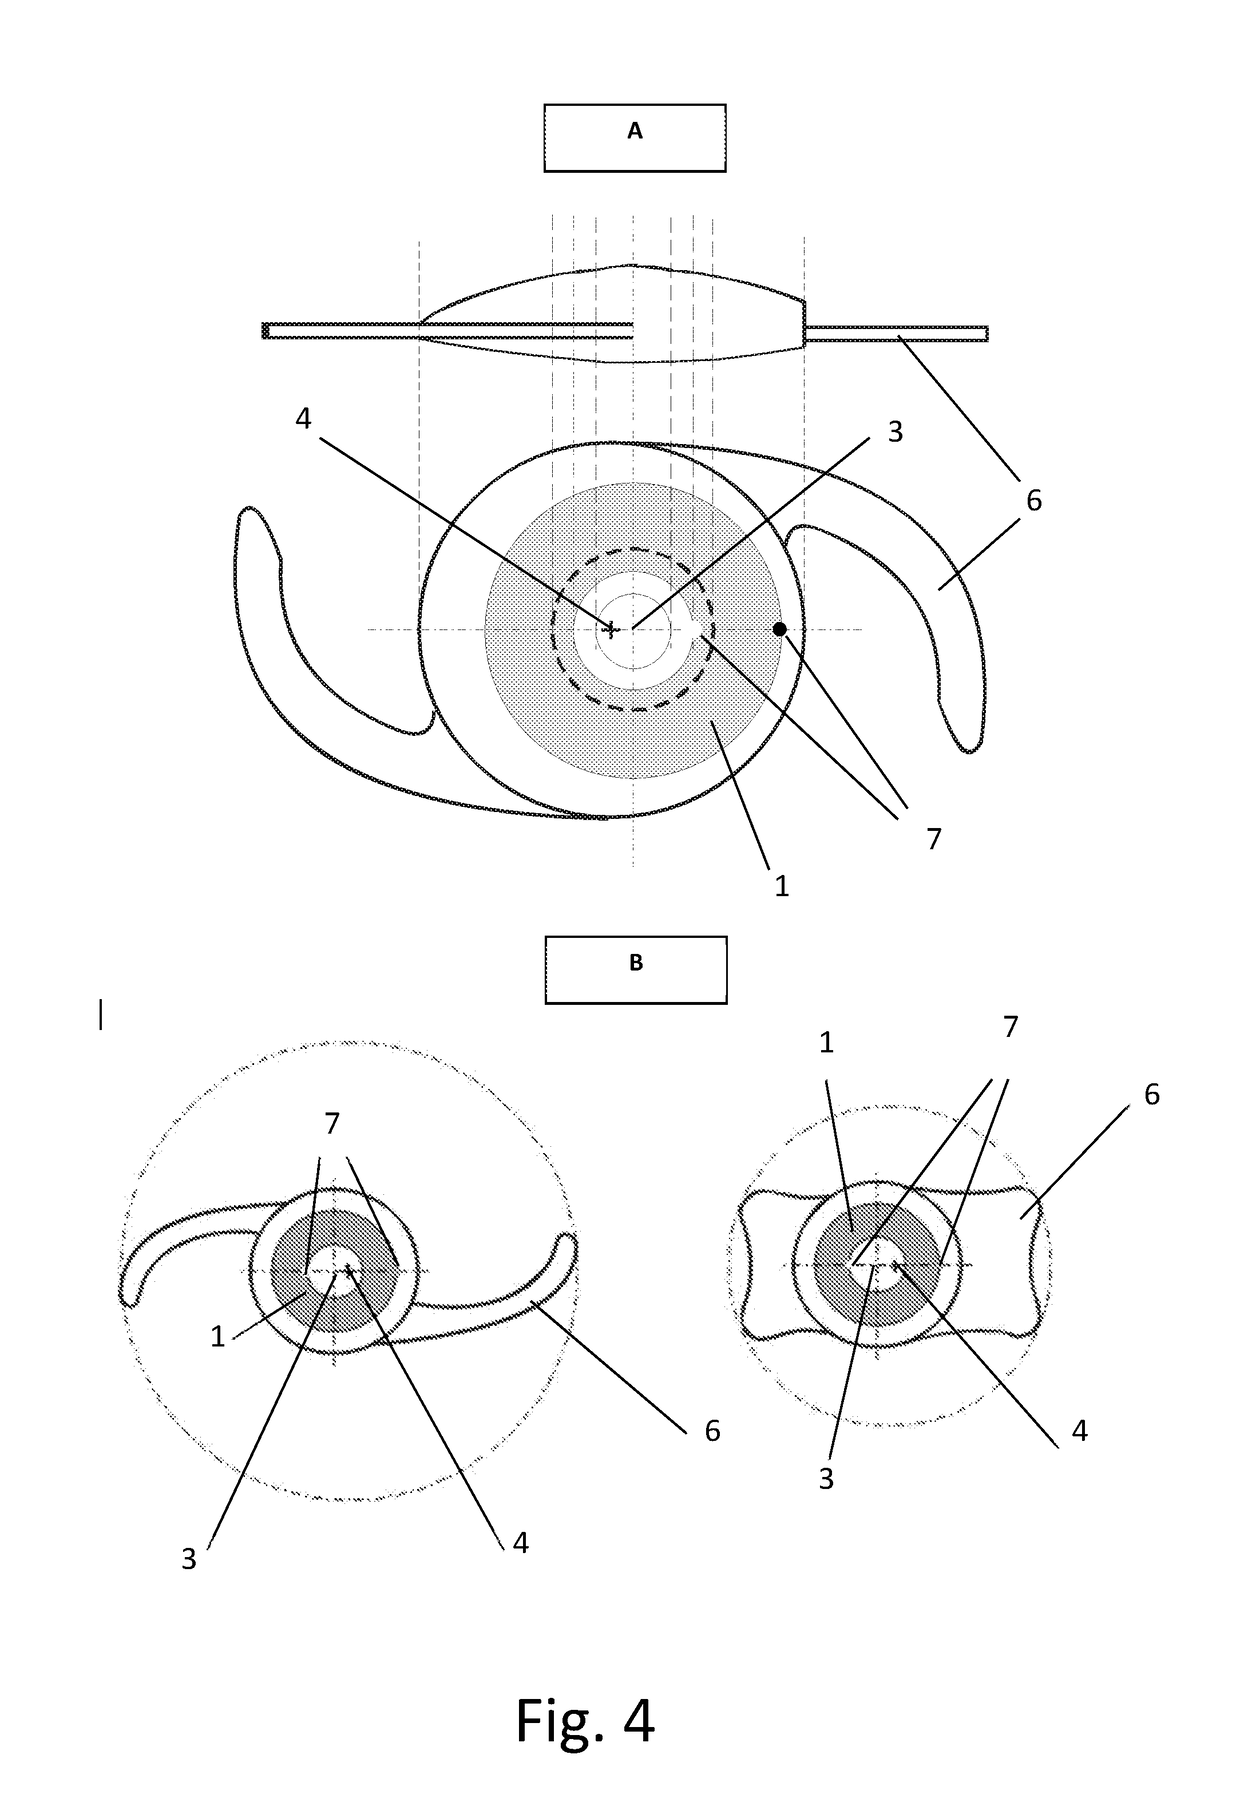 Multifocal intraocular lens with extended depth of field